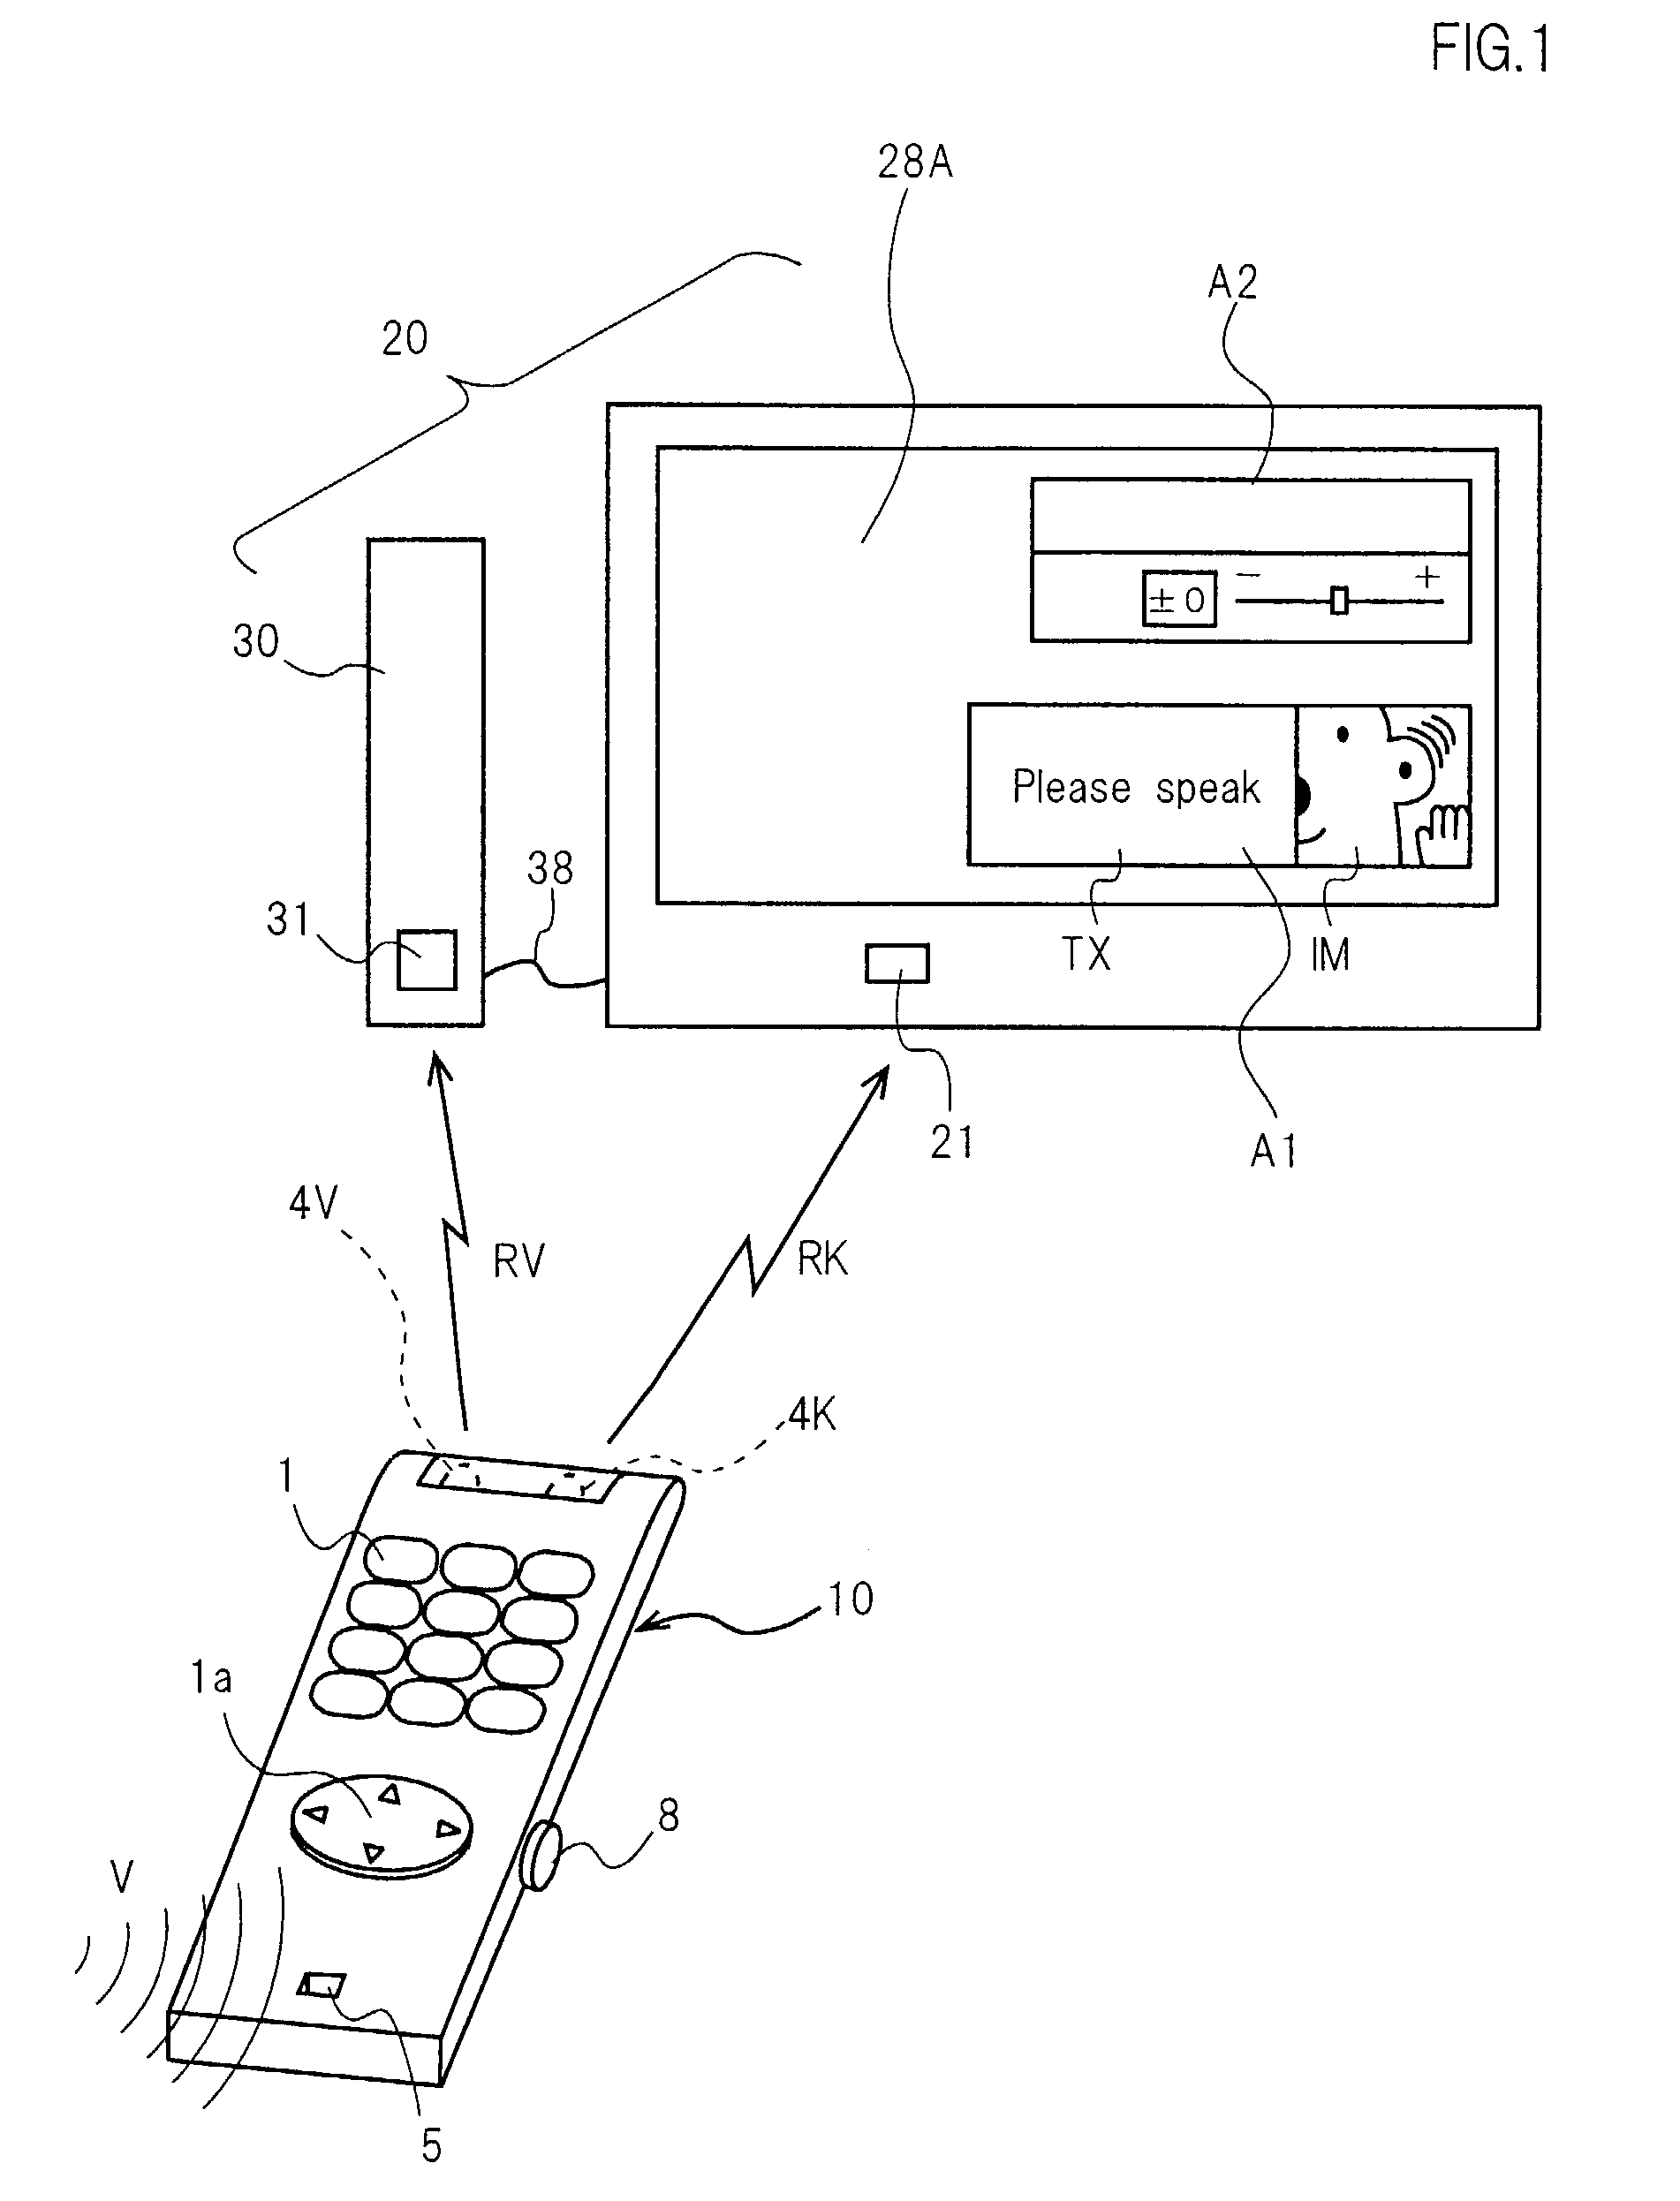 Remote-controlled apparatus, a remote control system, and a remote-controlled image-processing apparatus